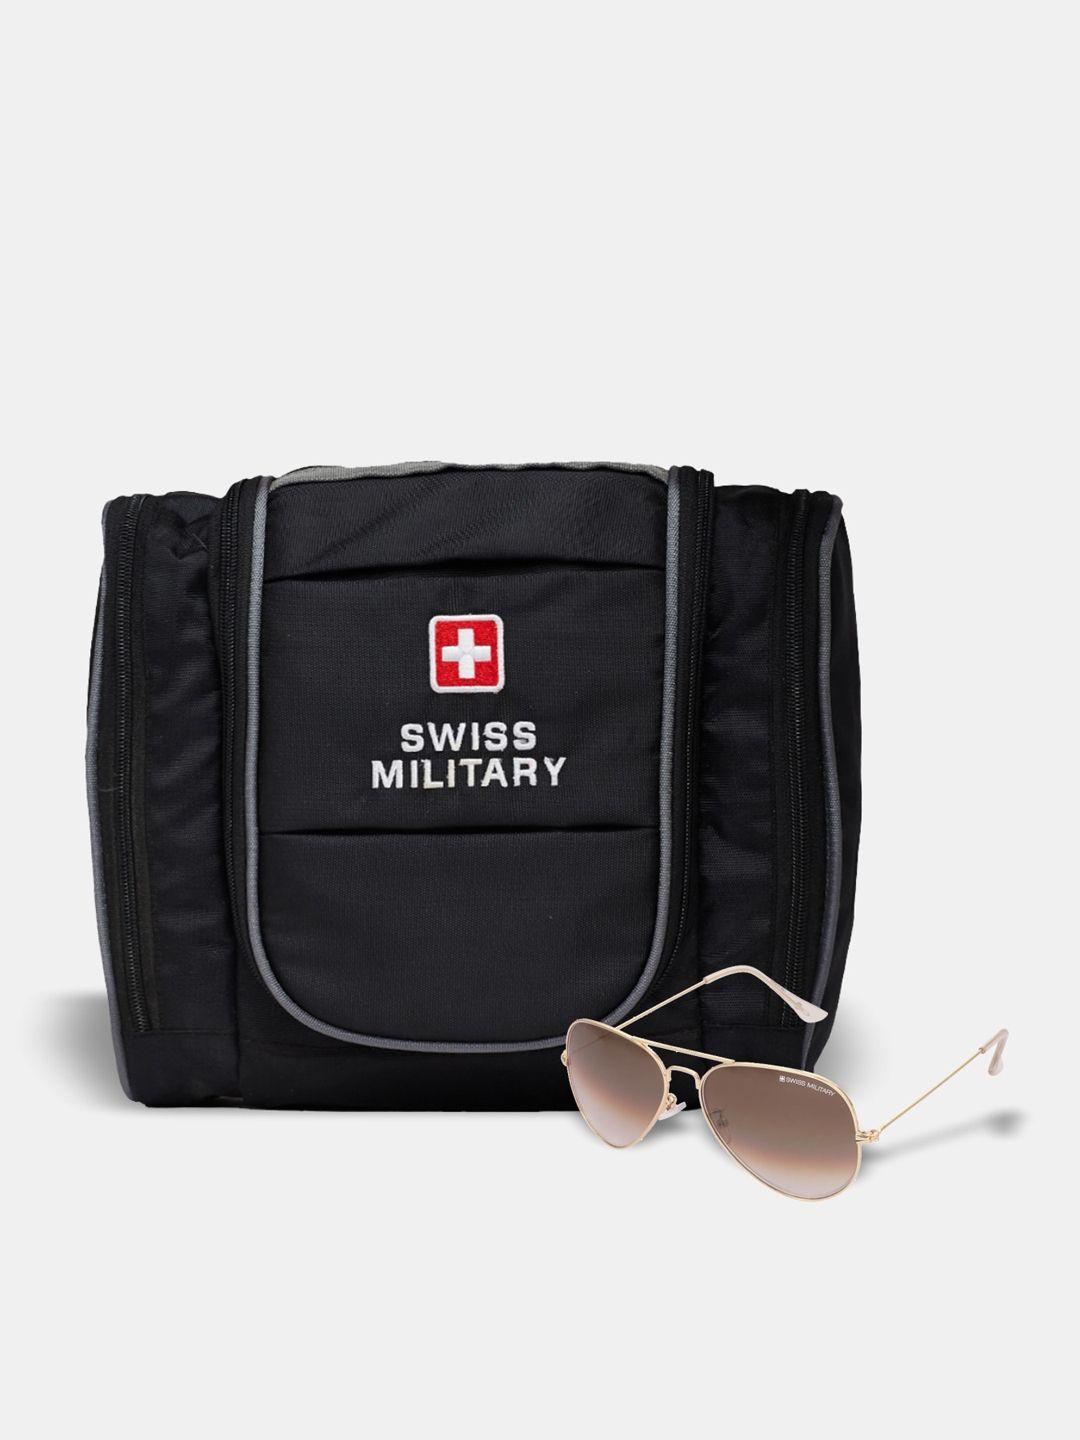 swiss military water-resistant toiletry bag with uv protected aviator sunglass